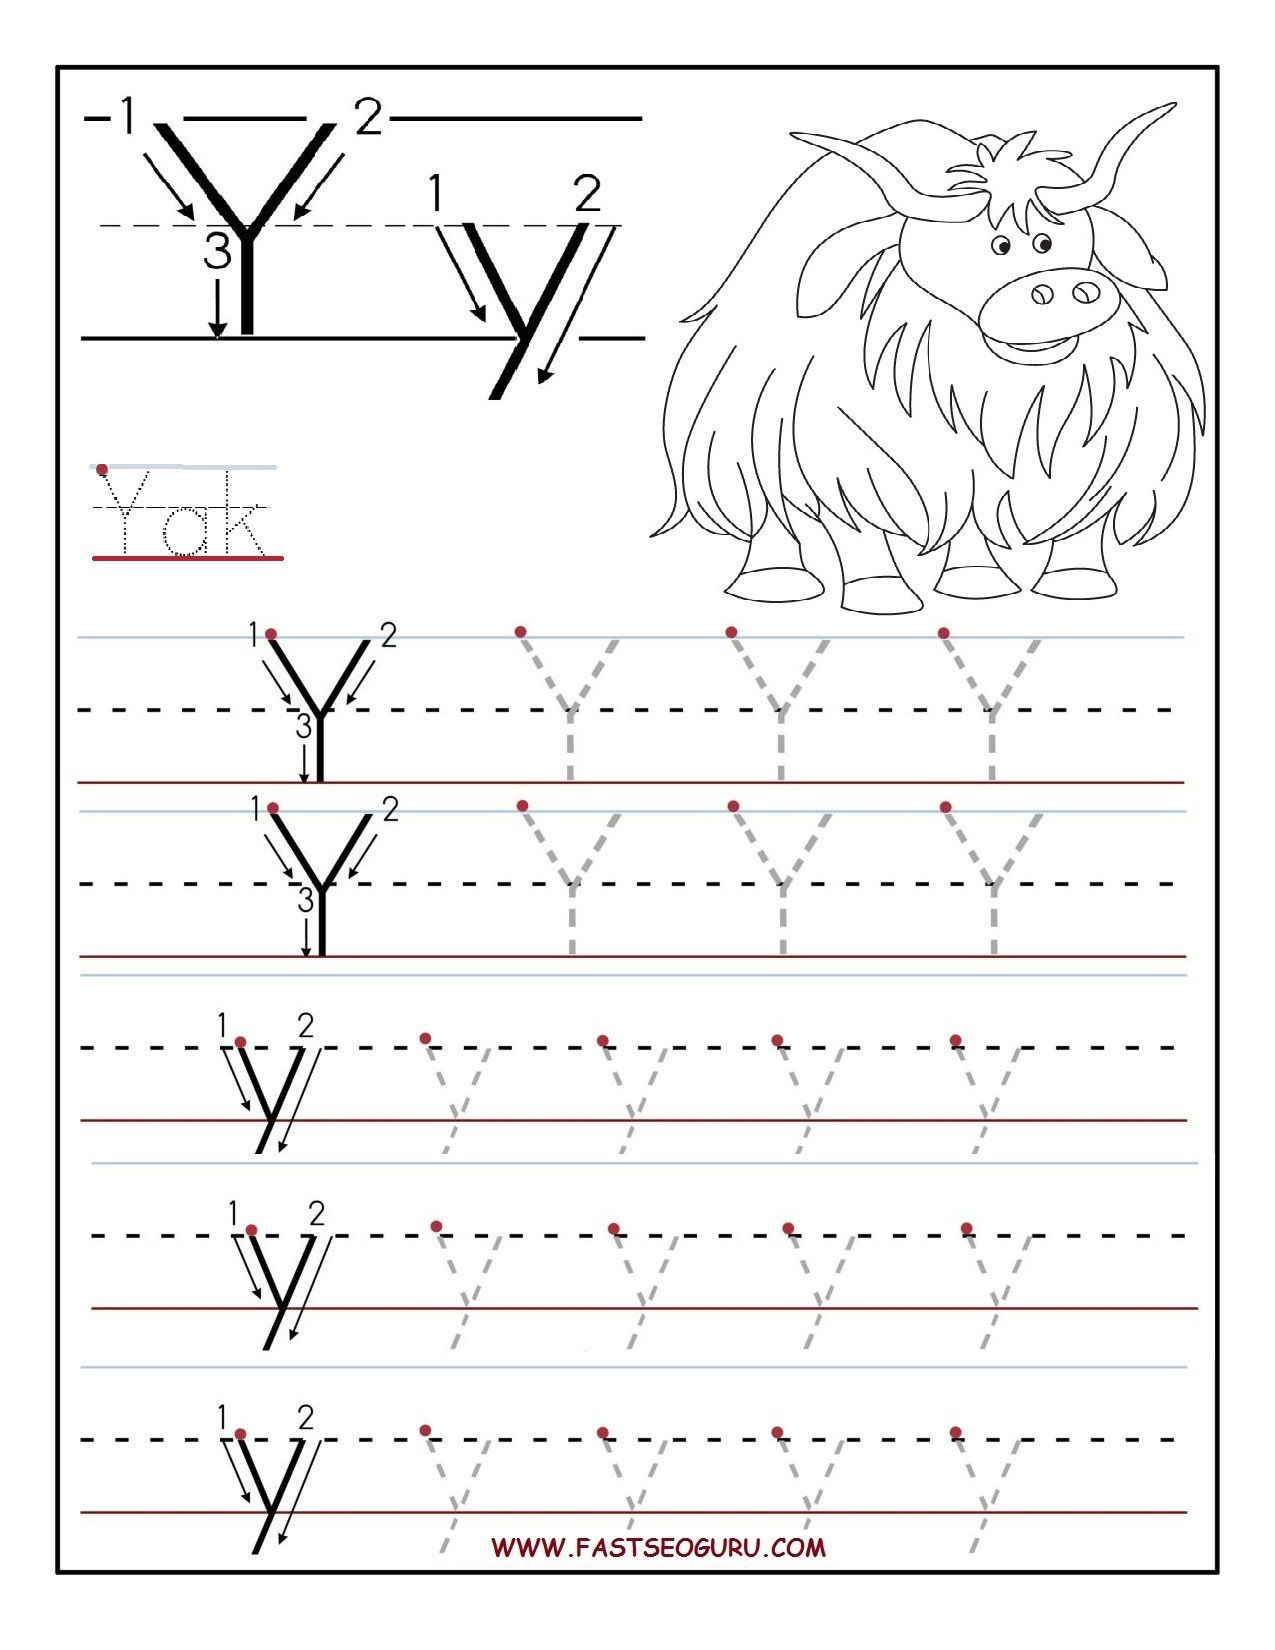 Printable Letter Y Tracing Worksheets For Preschool | Letter in Tracing Letter Y Worksheets